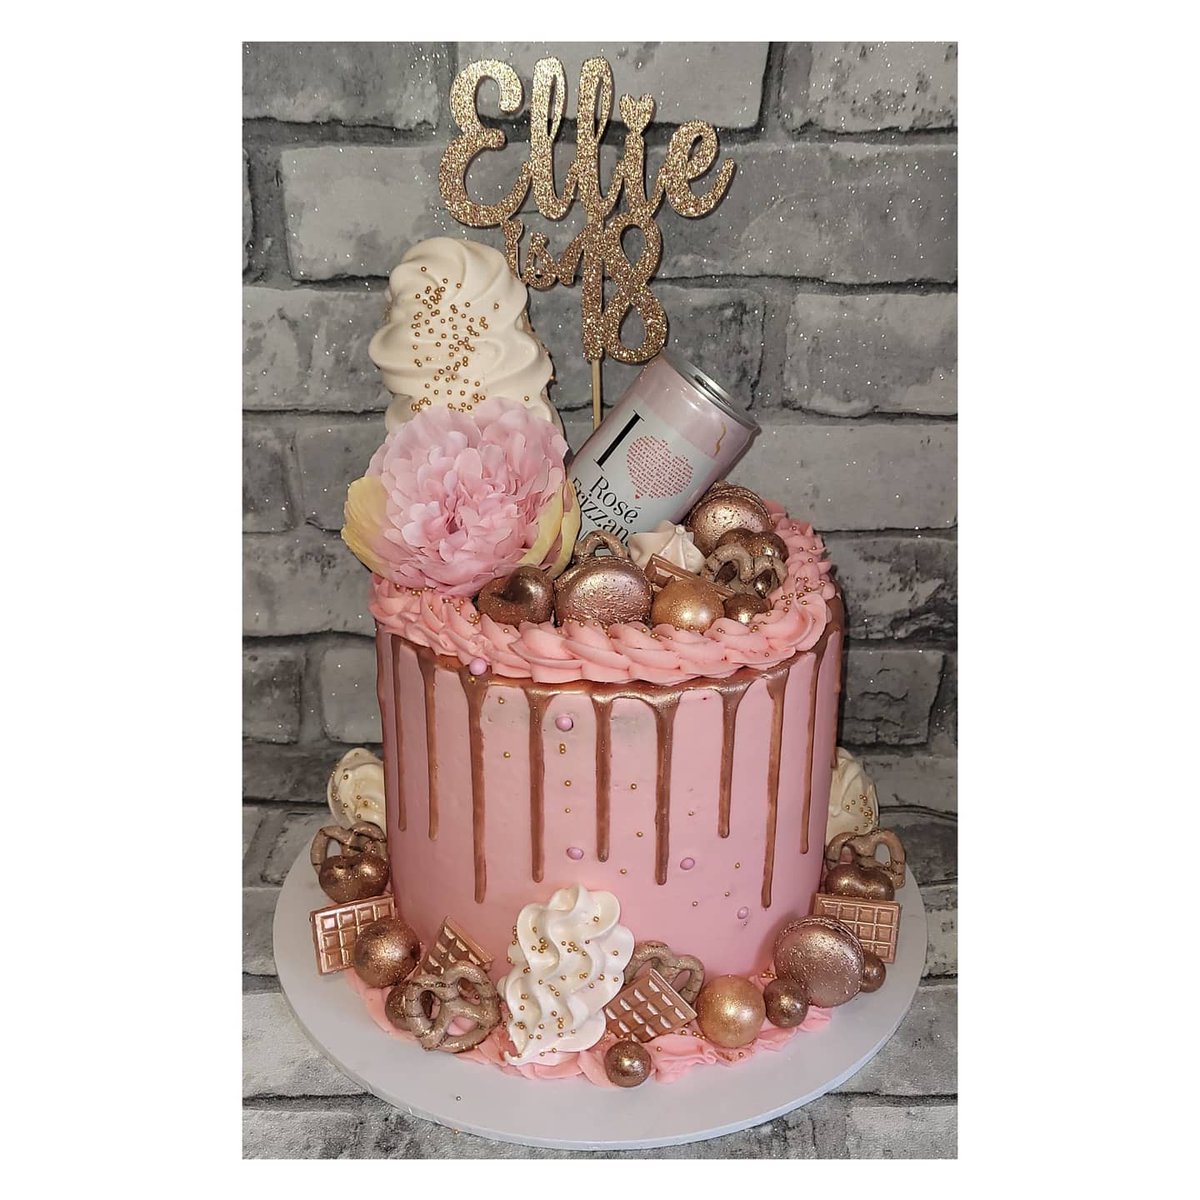 Absolutely loving my job this week 💗

#cakes #cake #cakemaker #baker #homemade #handdecorated #bakinglife #SmallBusiness 

Made by me #LindasCupcakes